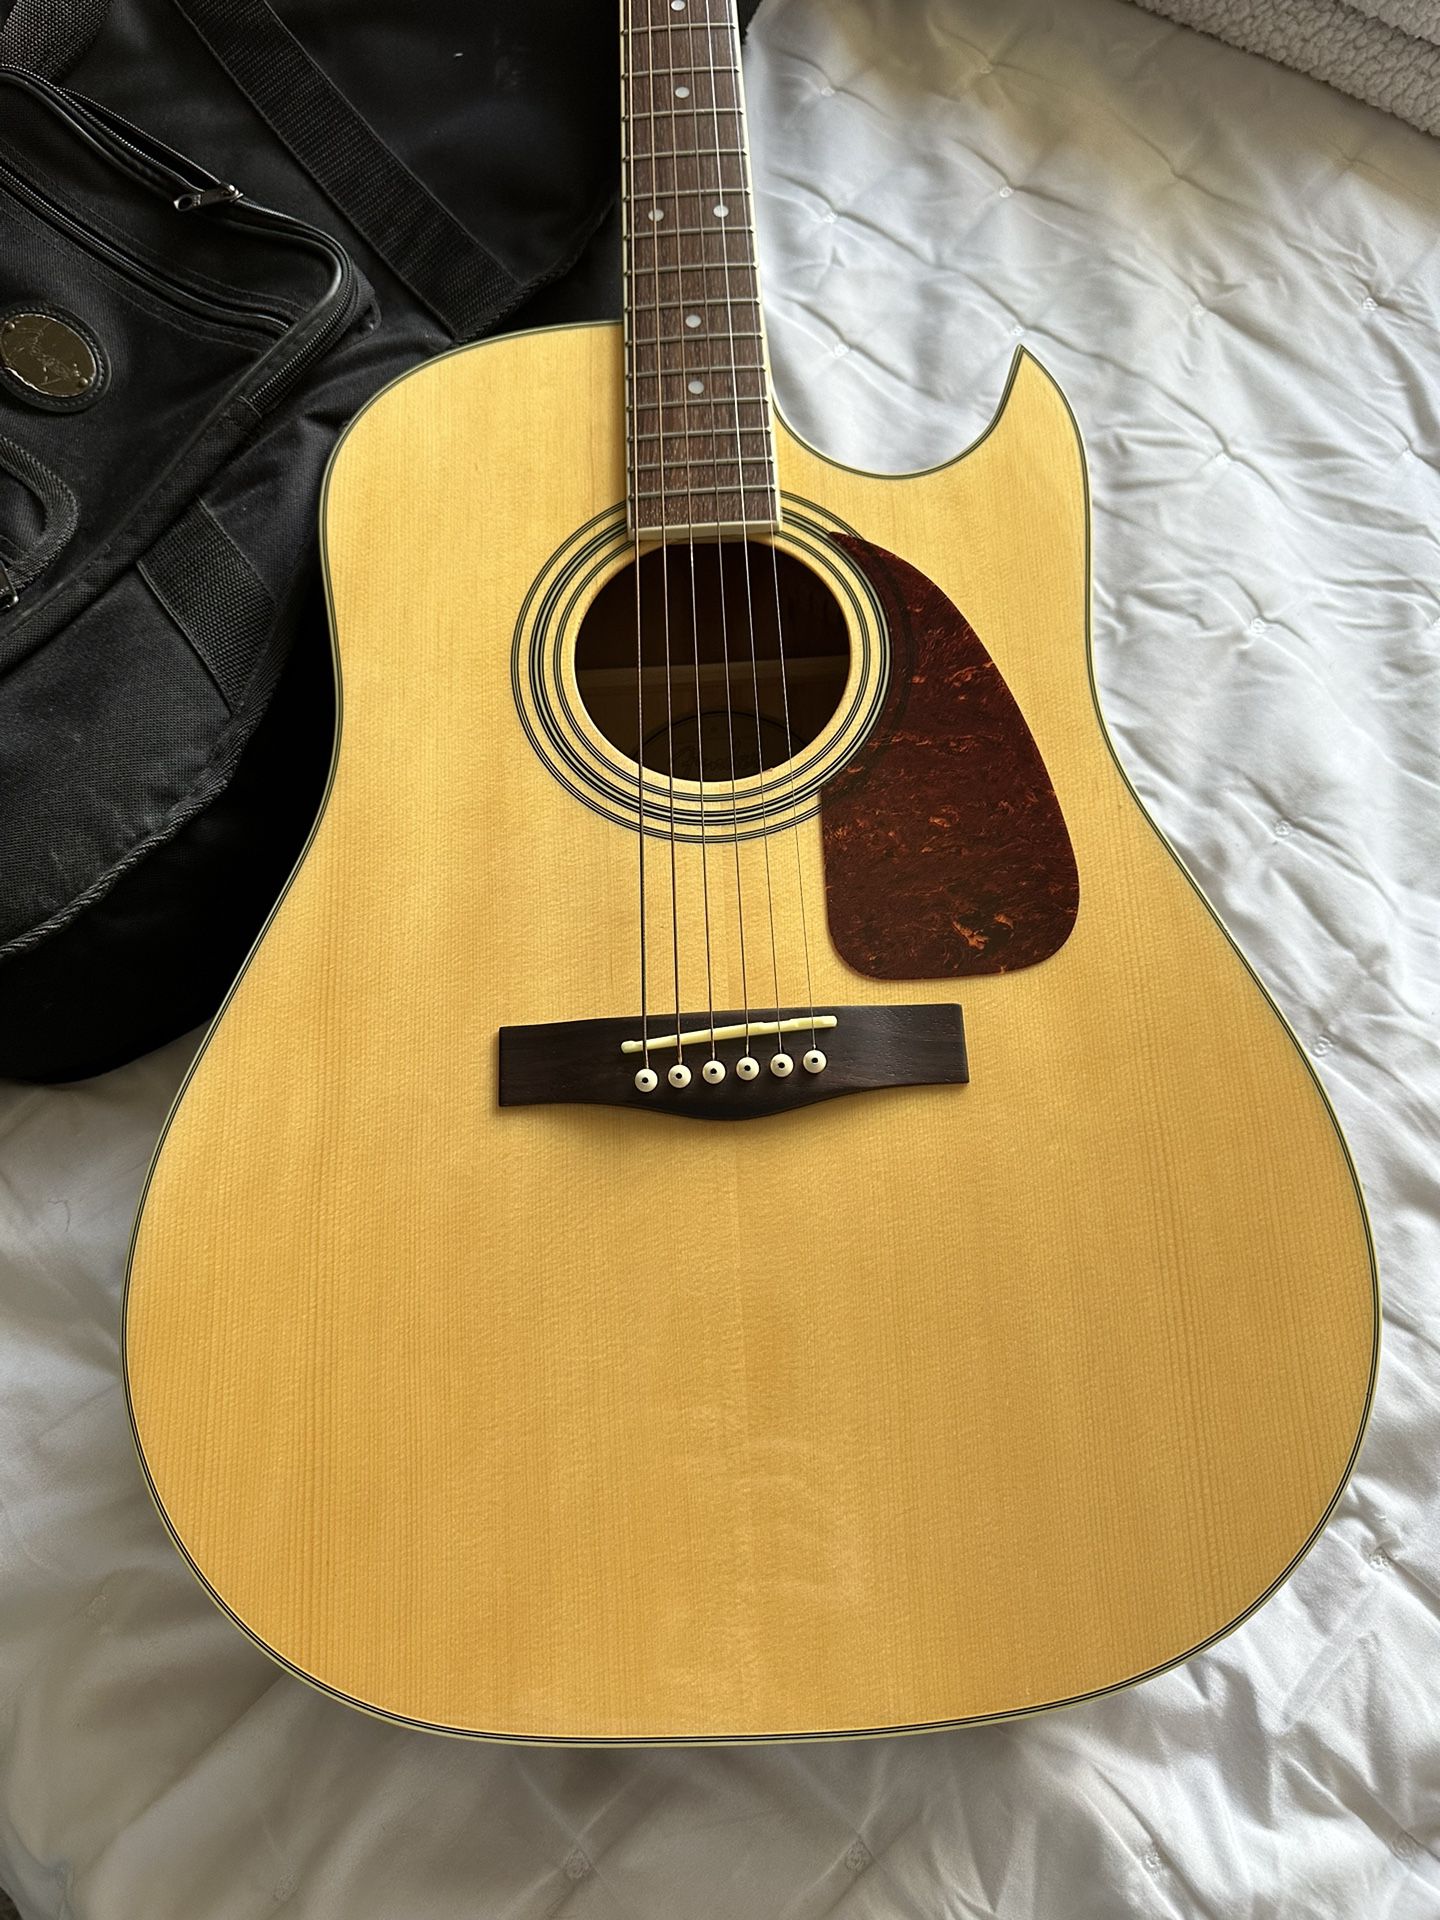 Fender acoustic electric guitar all working no issues.